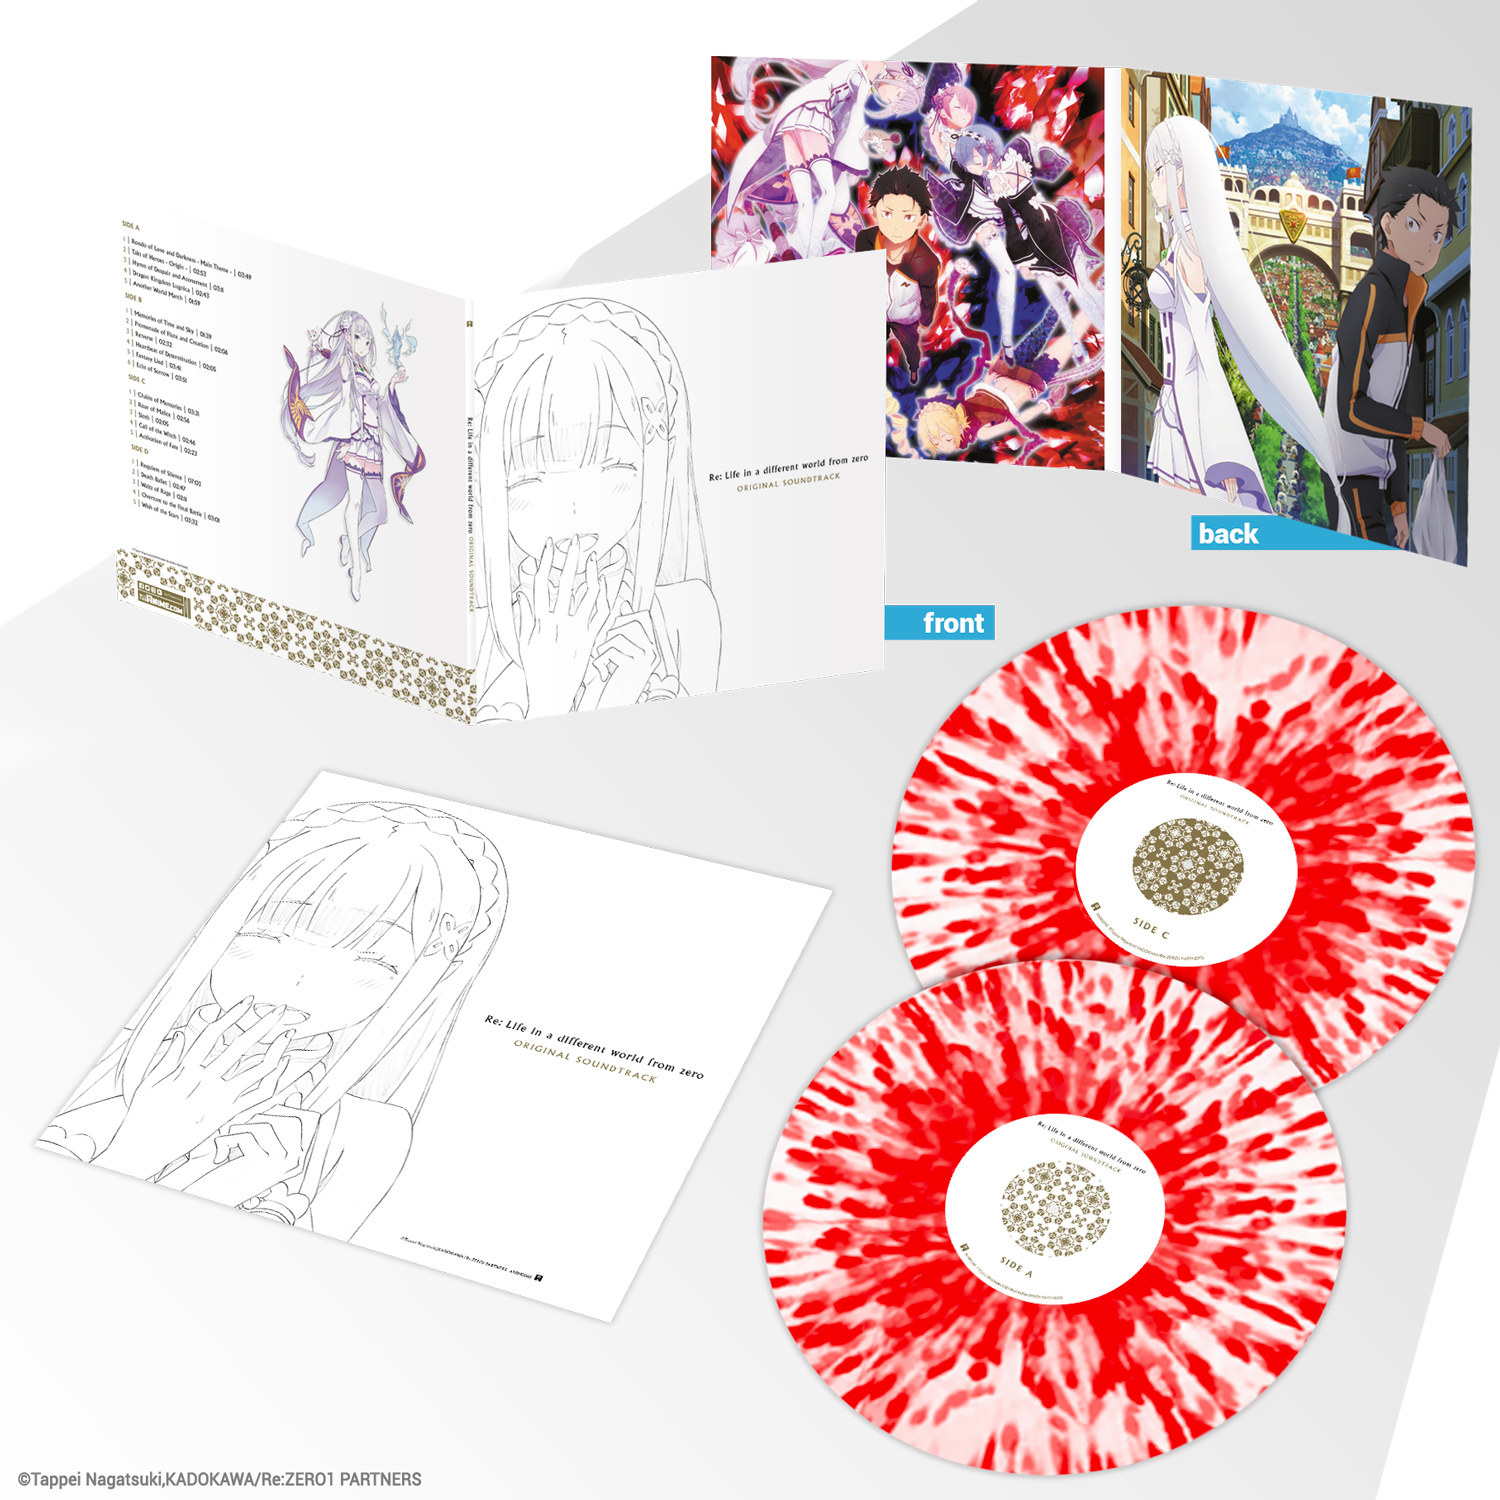 Re:ZERO Re: Life in a different world from zero - Season 1 Original Soundtrack Exclusive Vinyl (Crystal/Red) image count 0